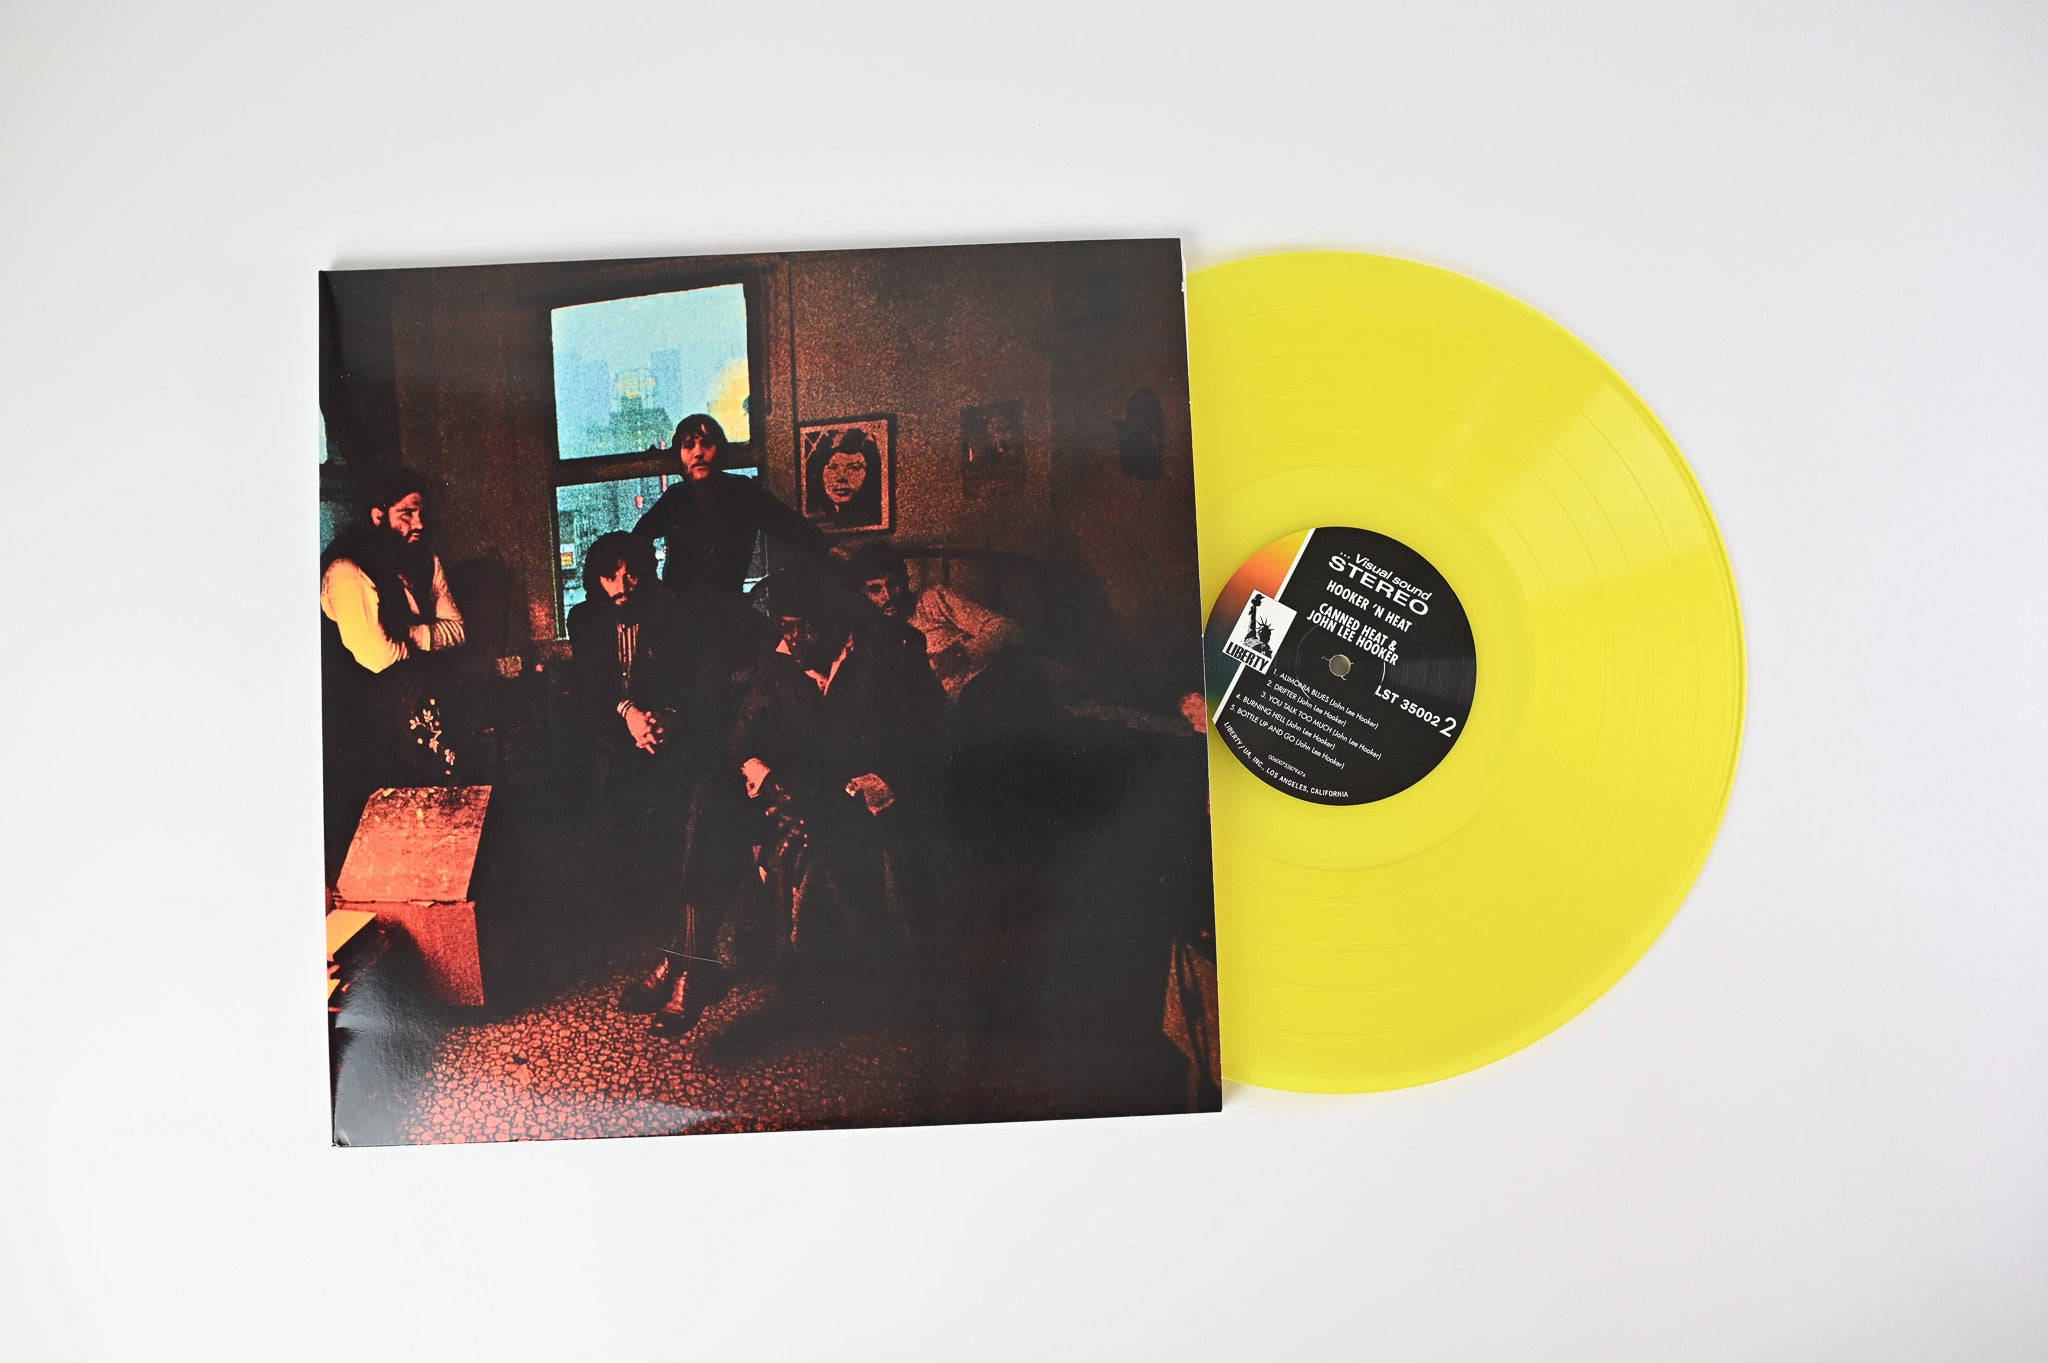 Canned Heat - Hooker ’N Heat on Culture Factory/Liberty RSD Reissue on Yellow Translucent & Brown Vinyl